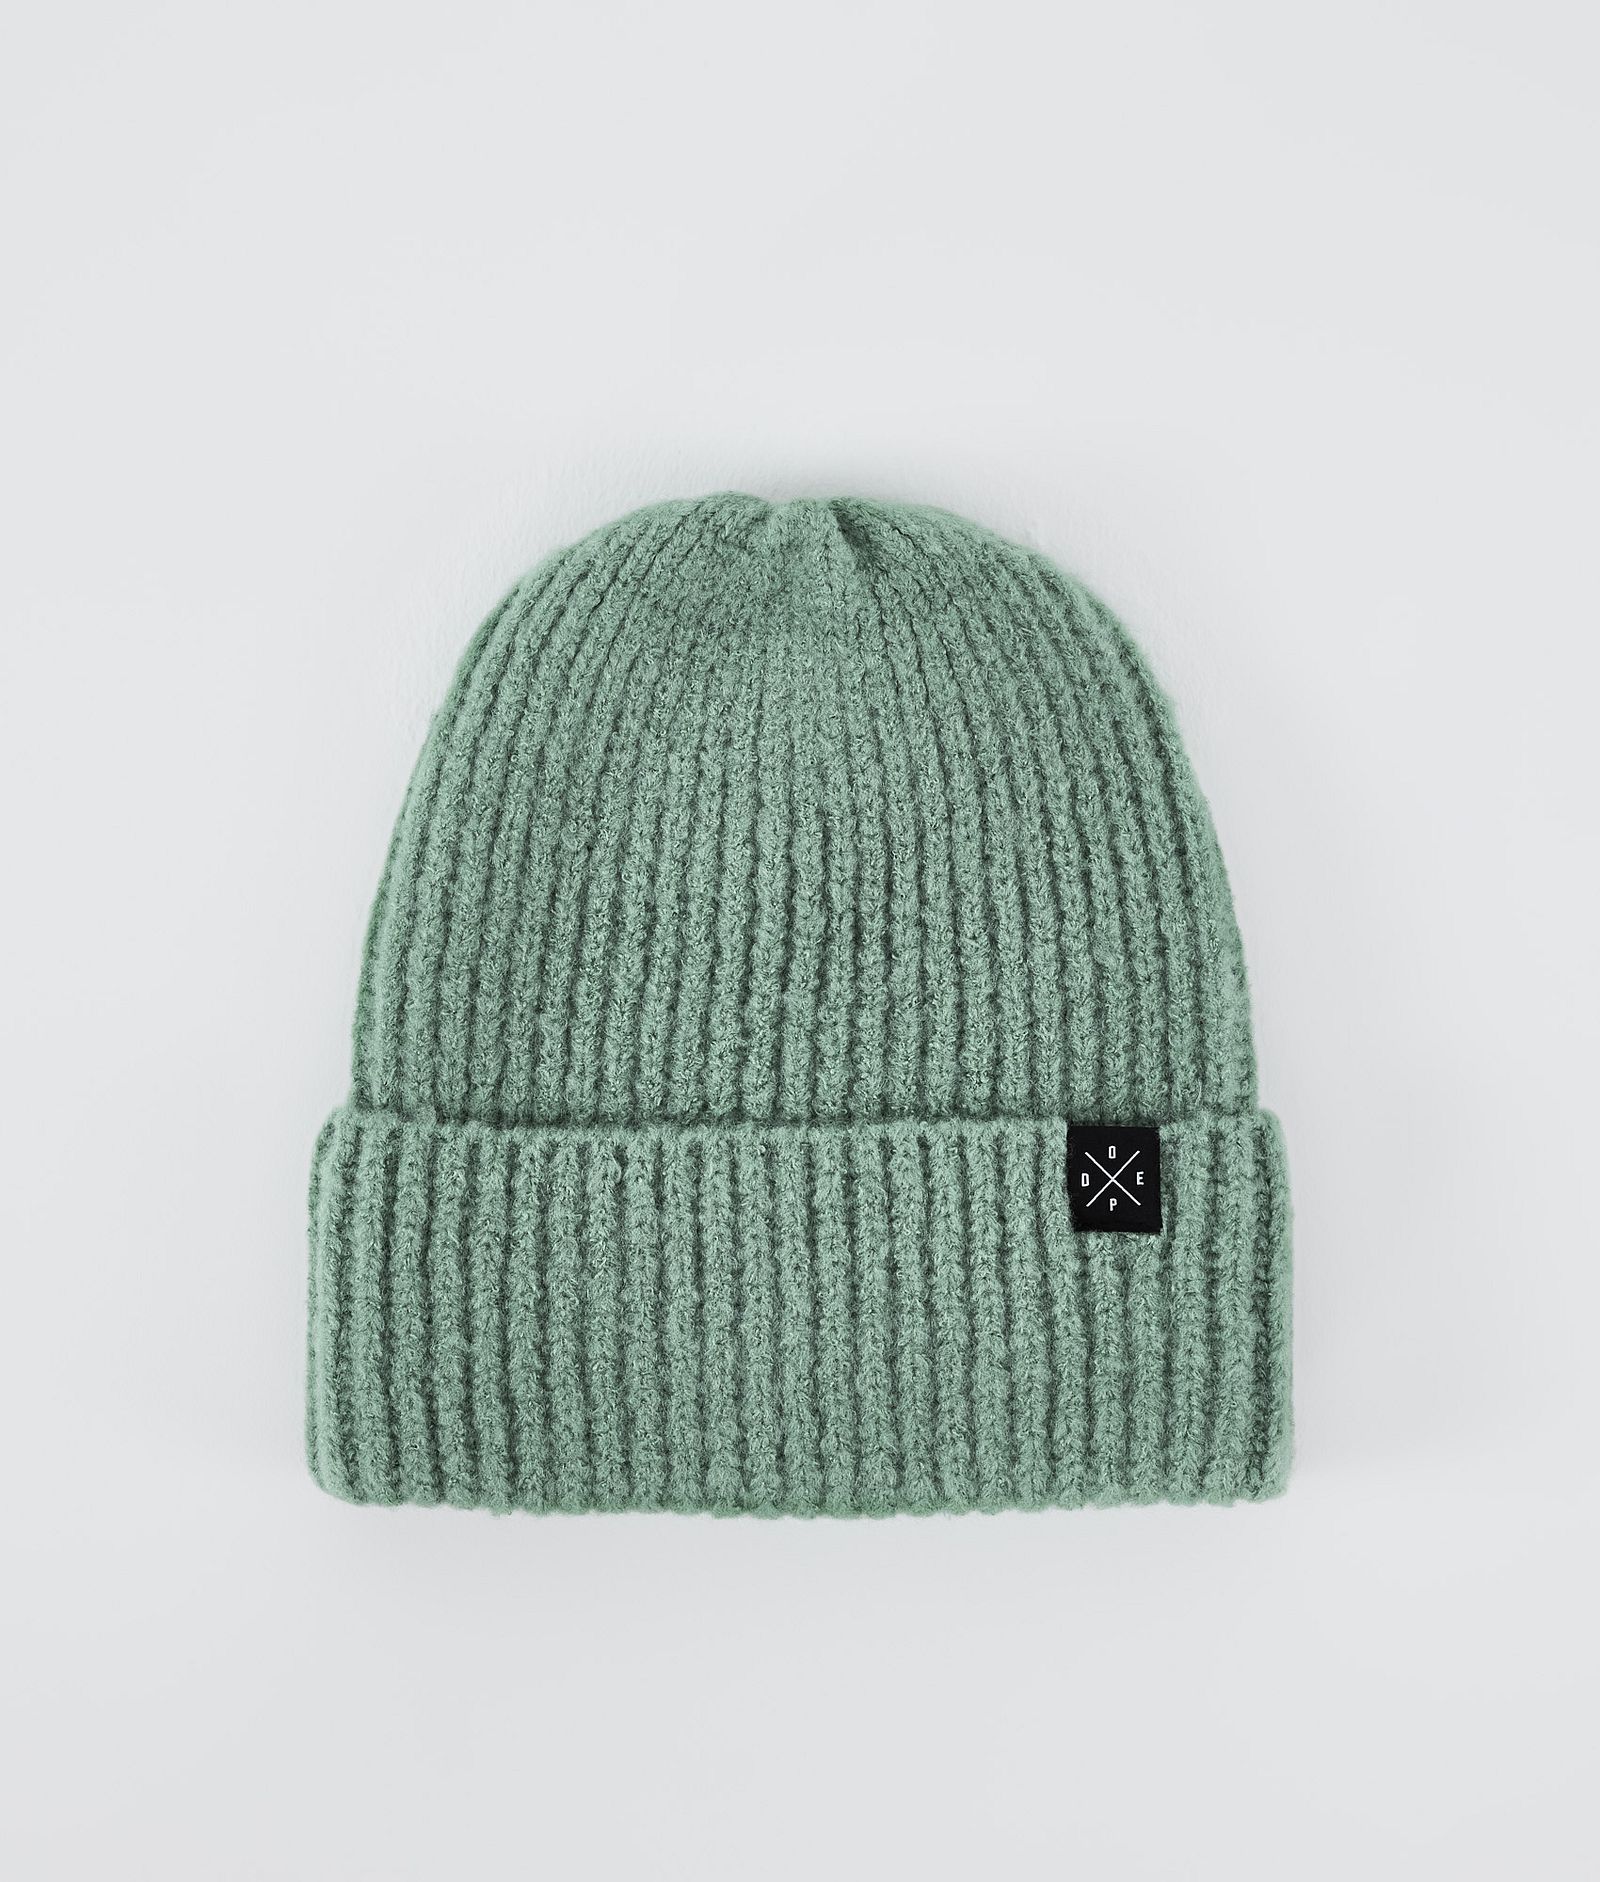 Dope Chunky 2022 Beanie Faded Green, Image 1 of 3